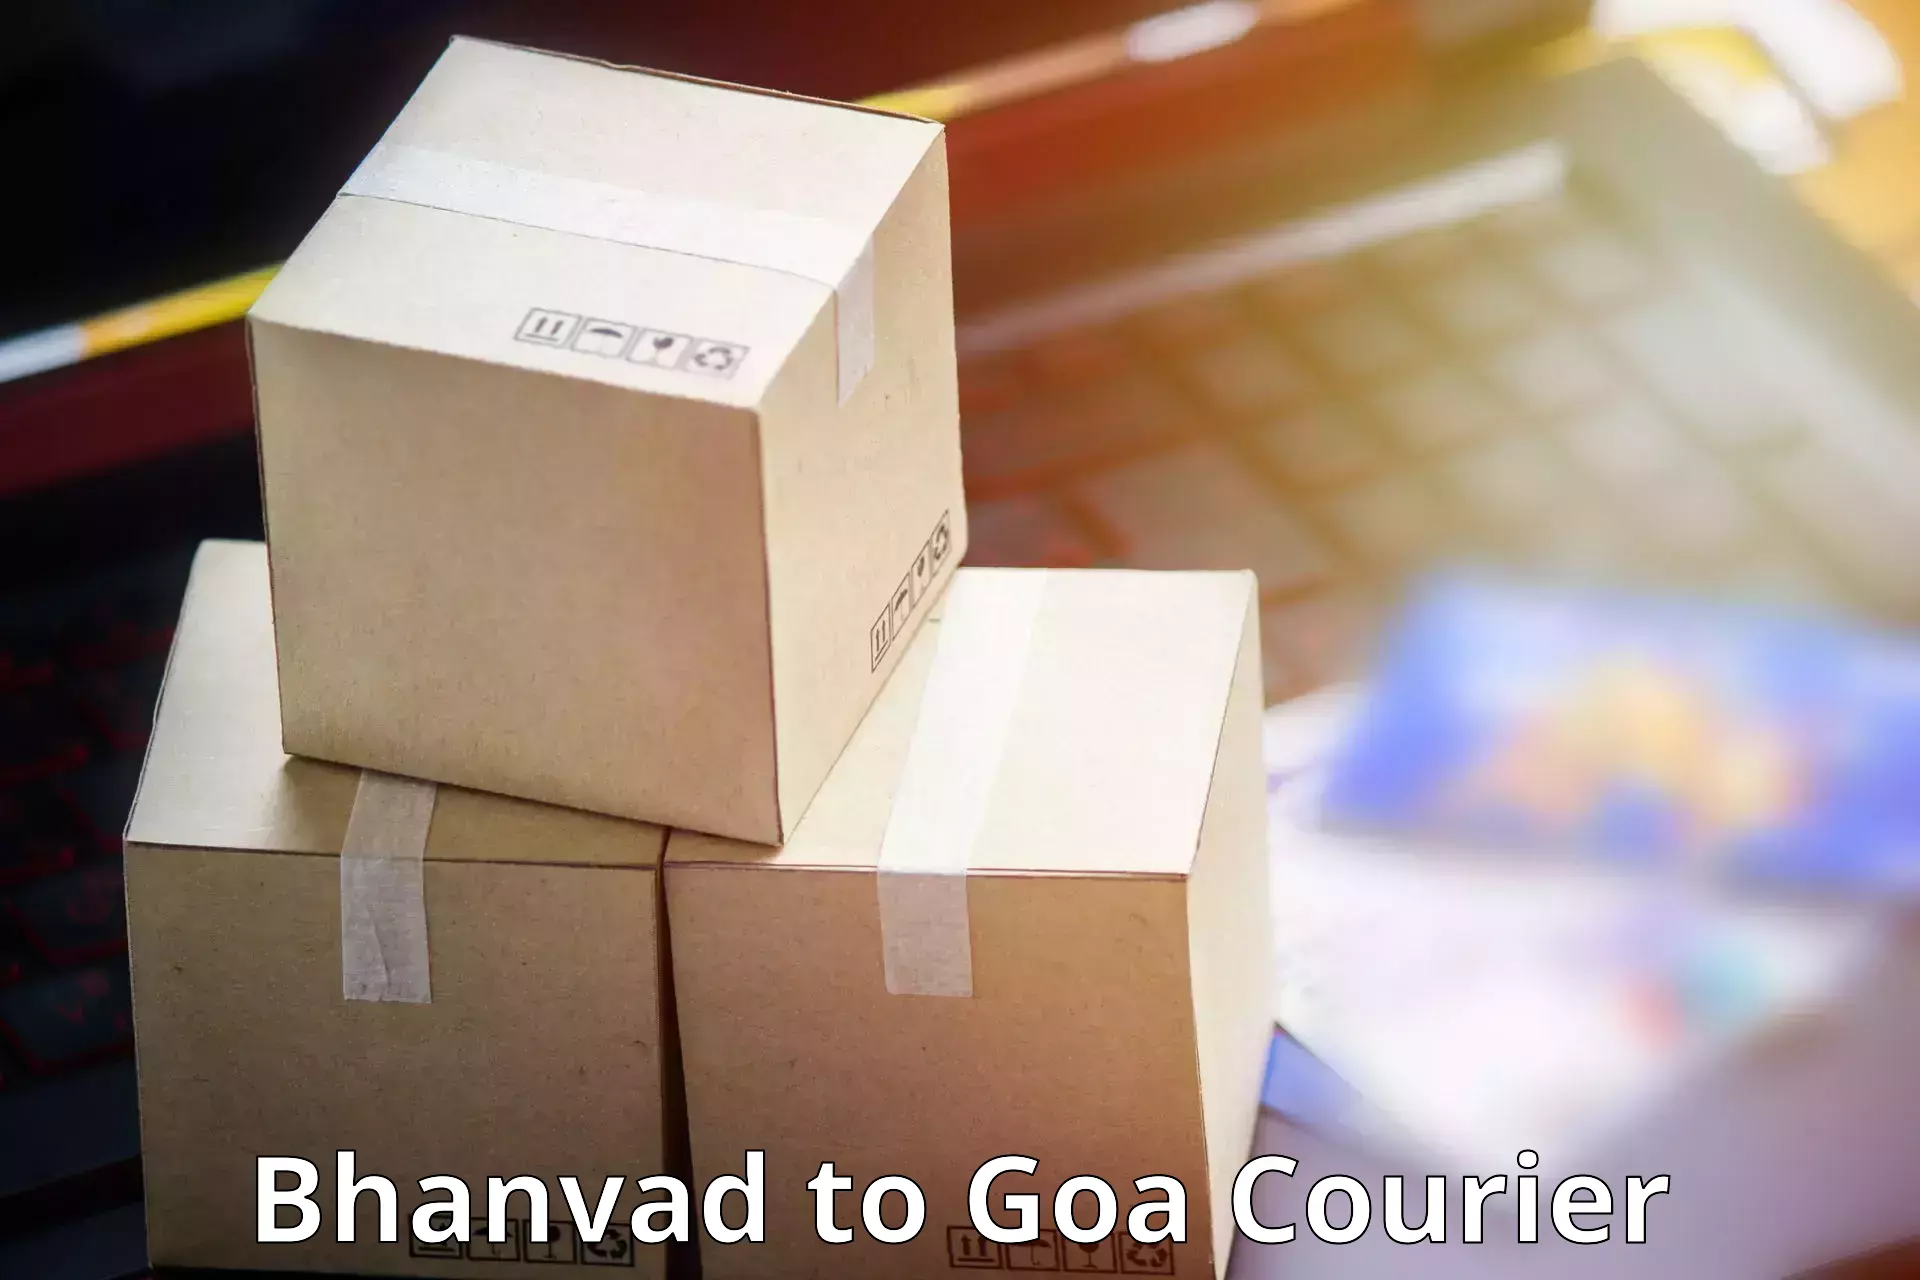 Courier service innovation Bhanvad to South Goa